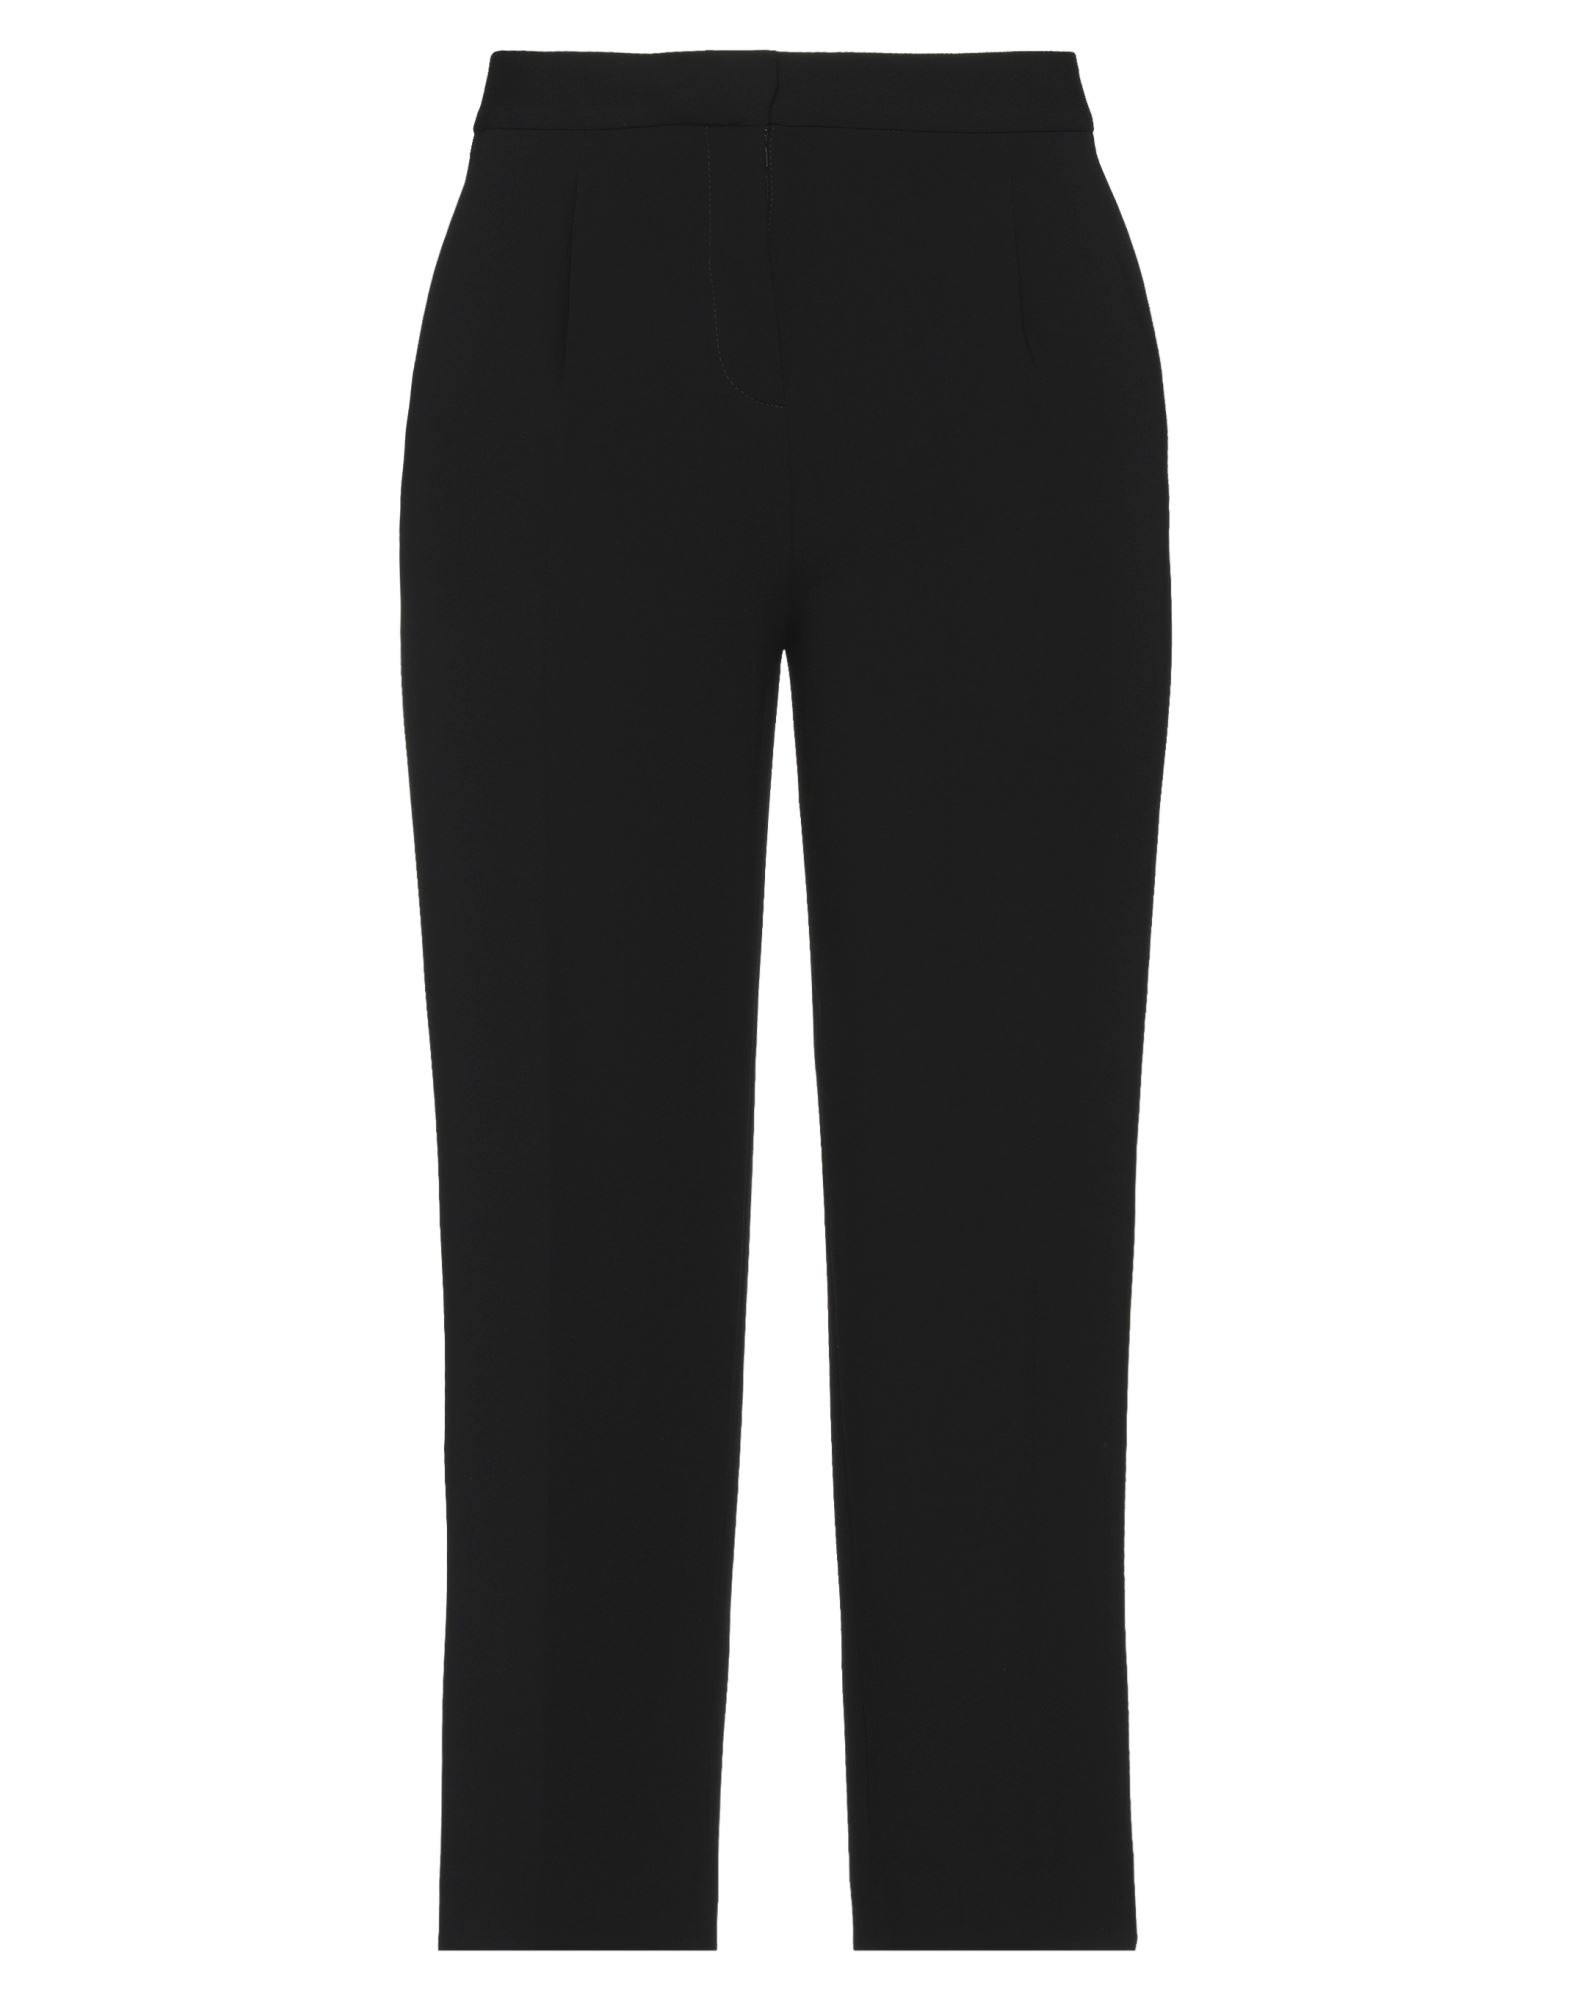 BOUTIQUE MOSCHINO BOUTIQUE MOSCHINO WOMAN PANTS BLACK SIZE 10 TRIACETATE, POLYESTER